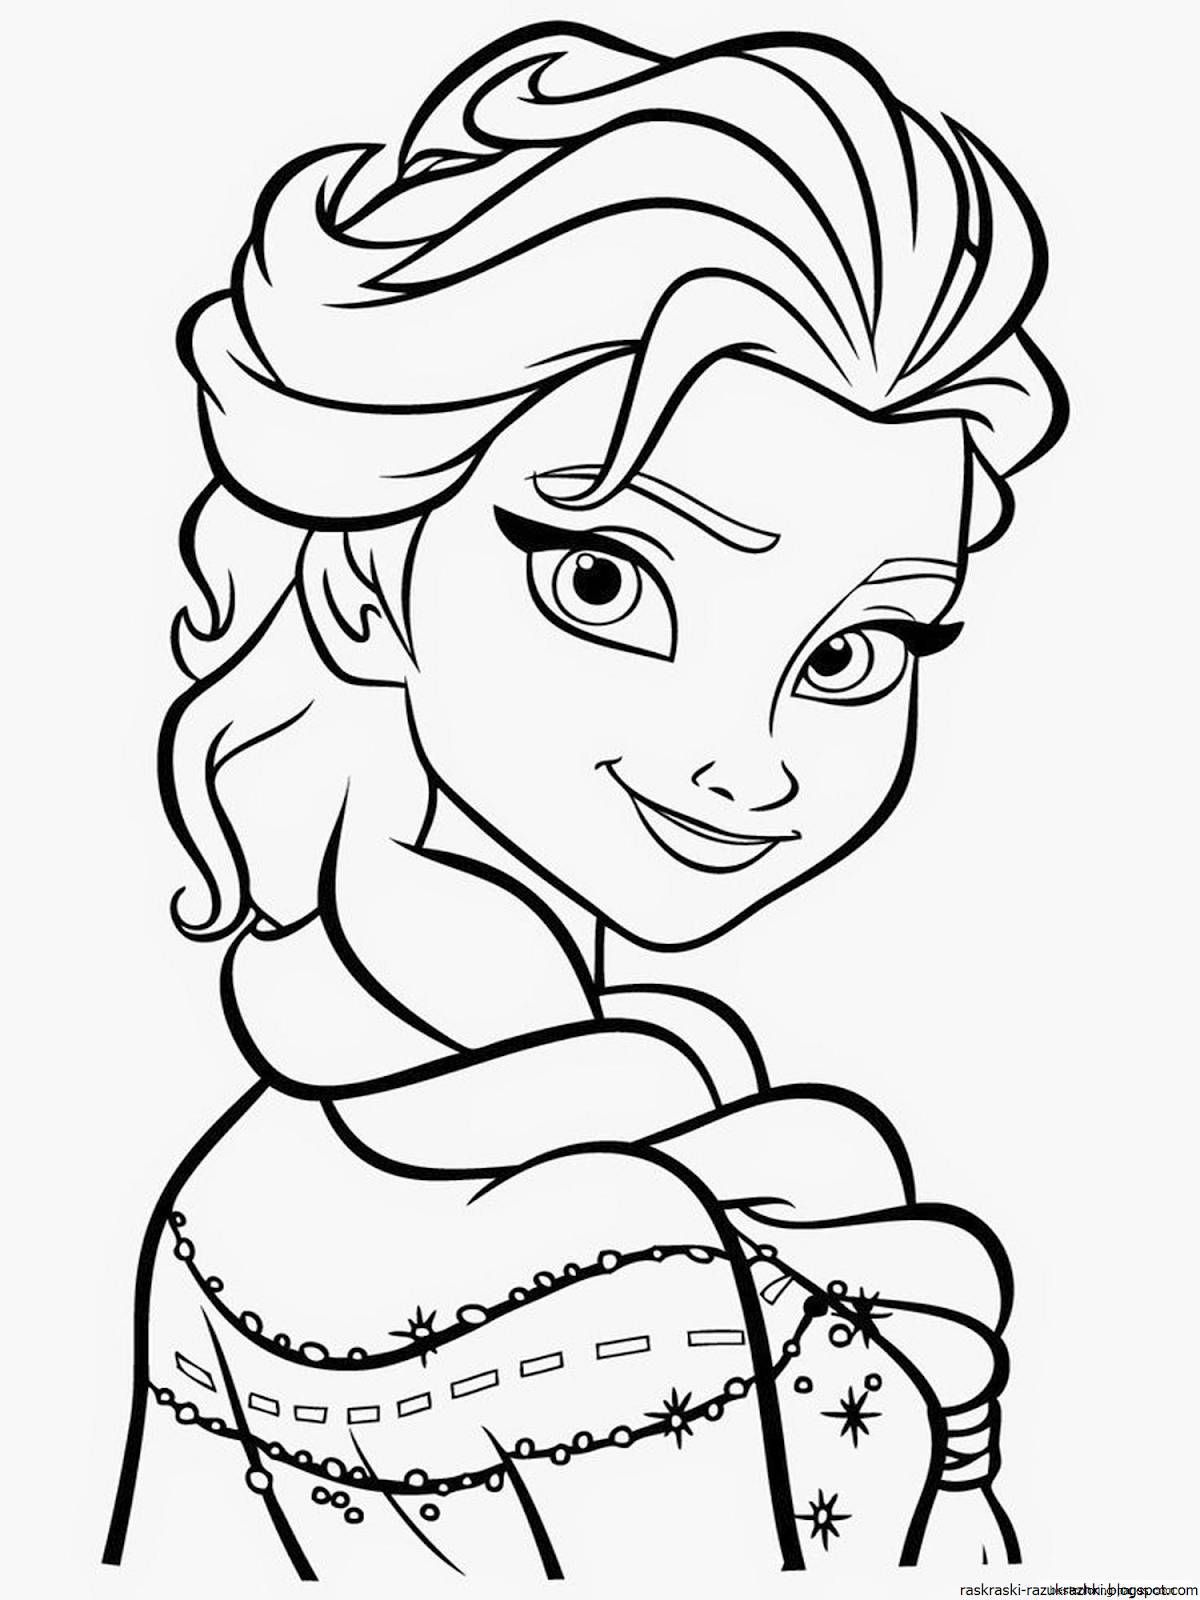 Fun coloring page for girls with a cold heart